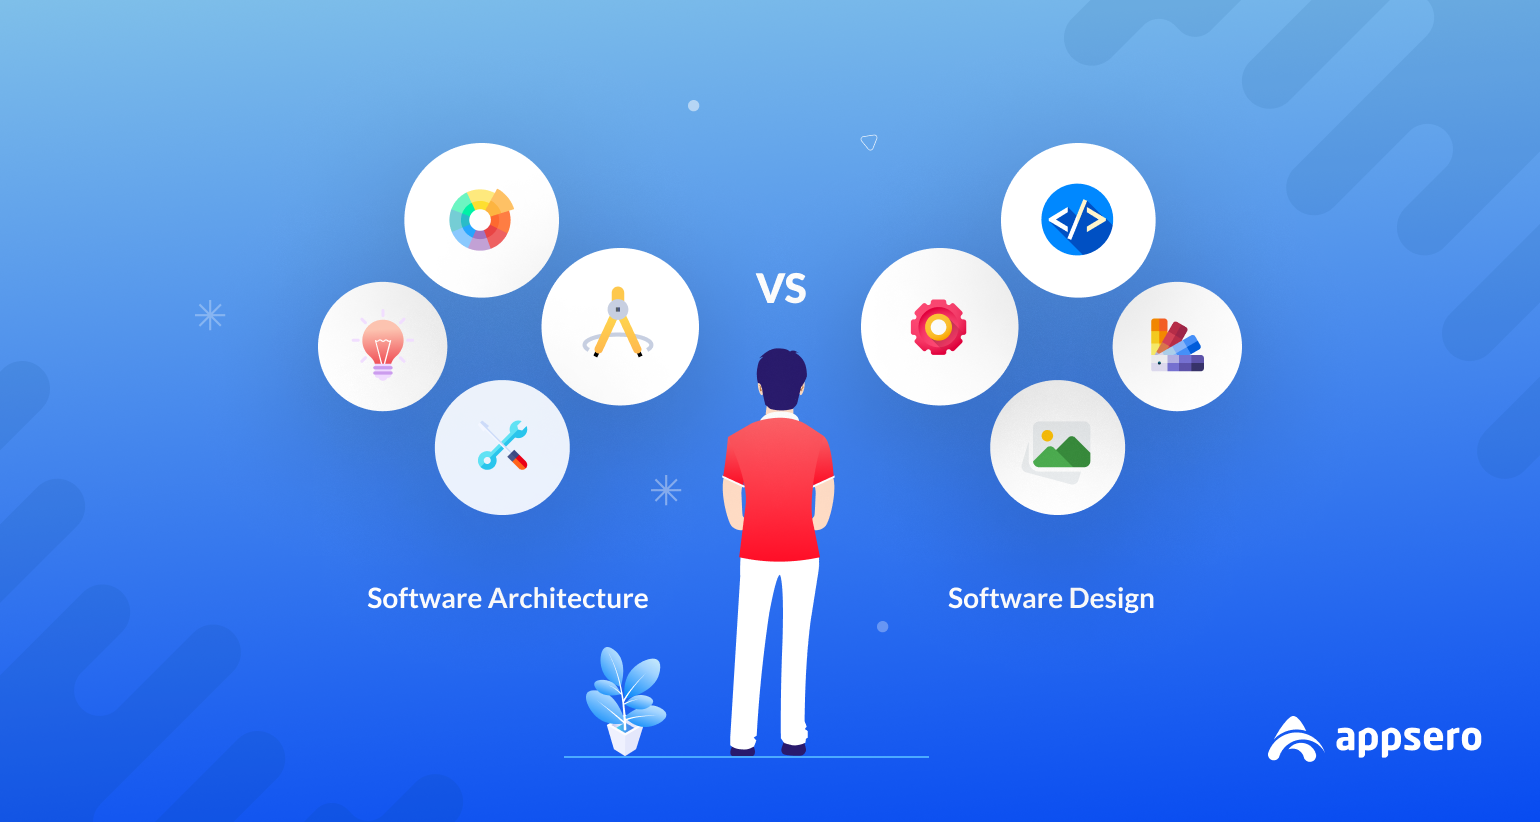 software architecture and design